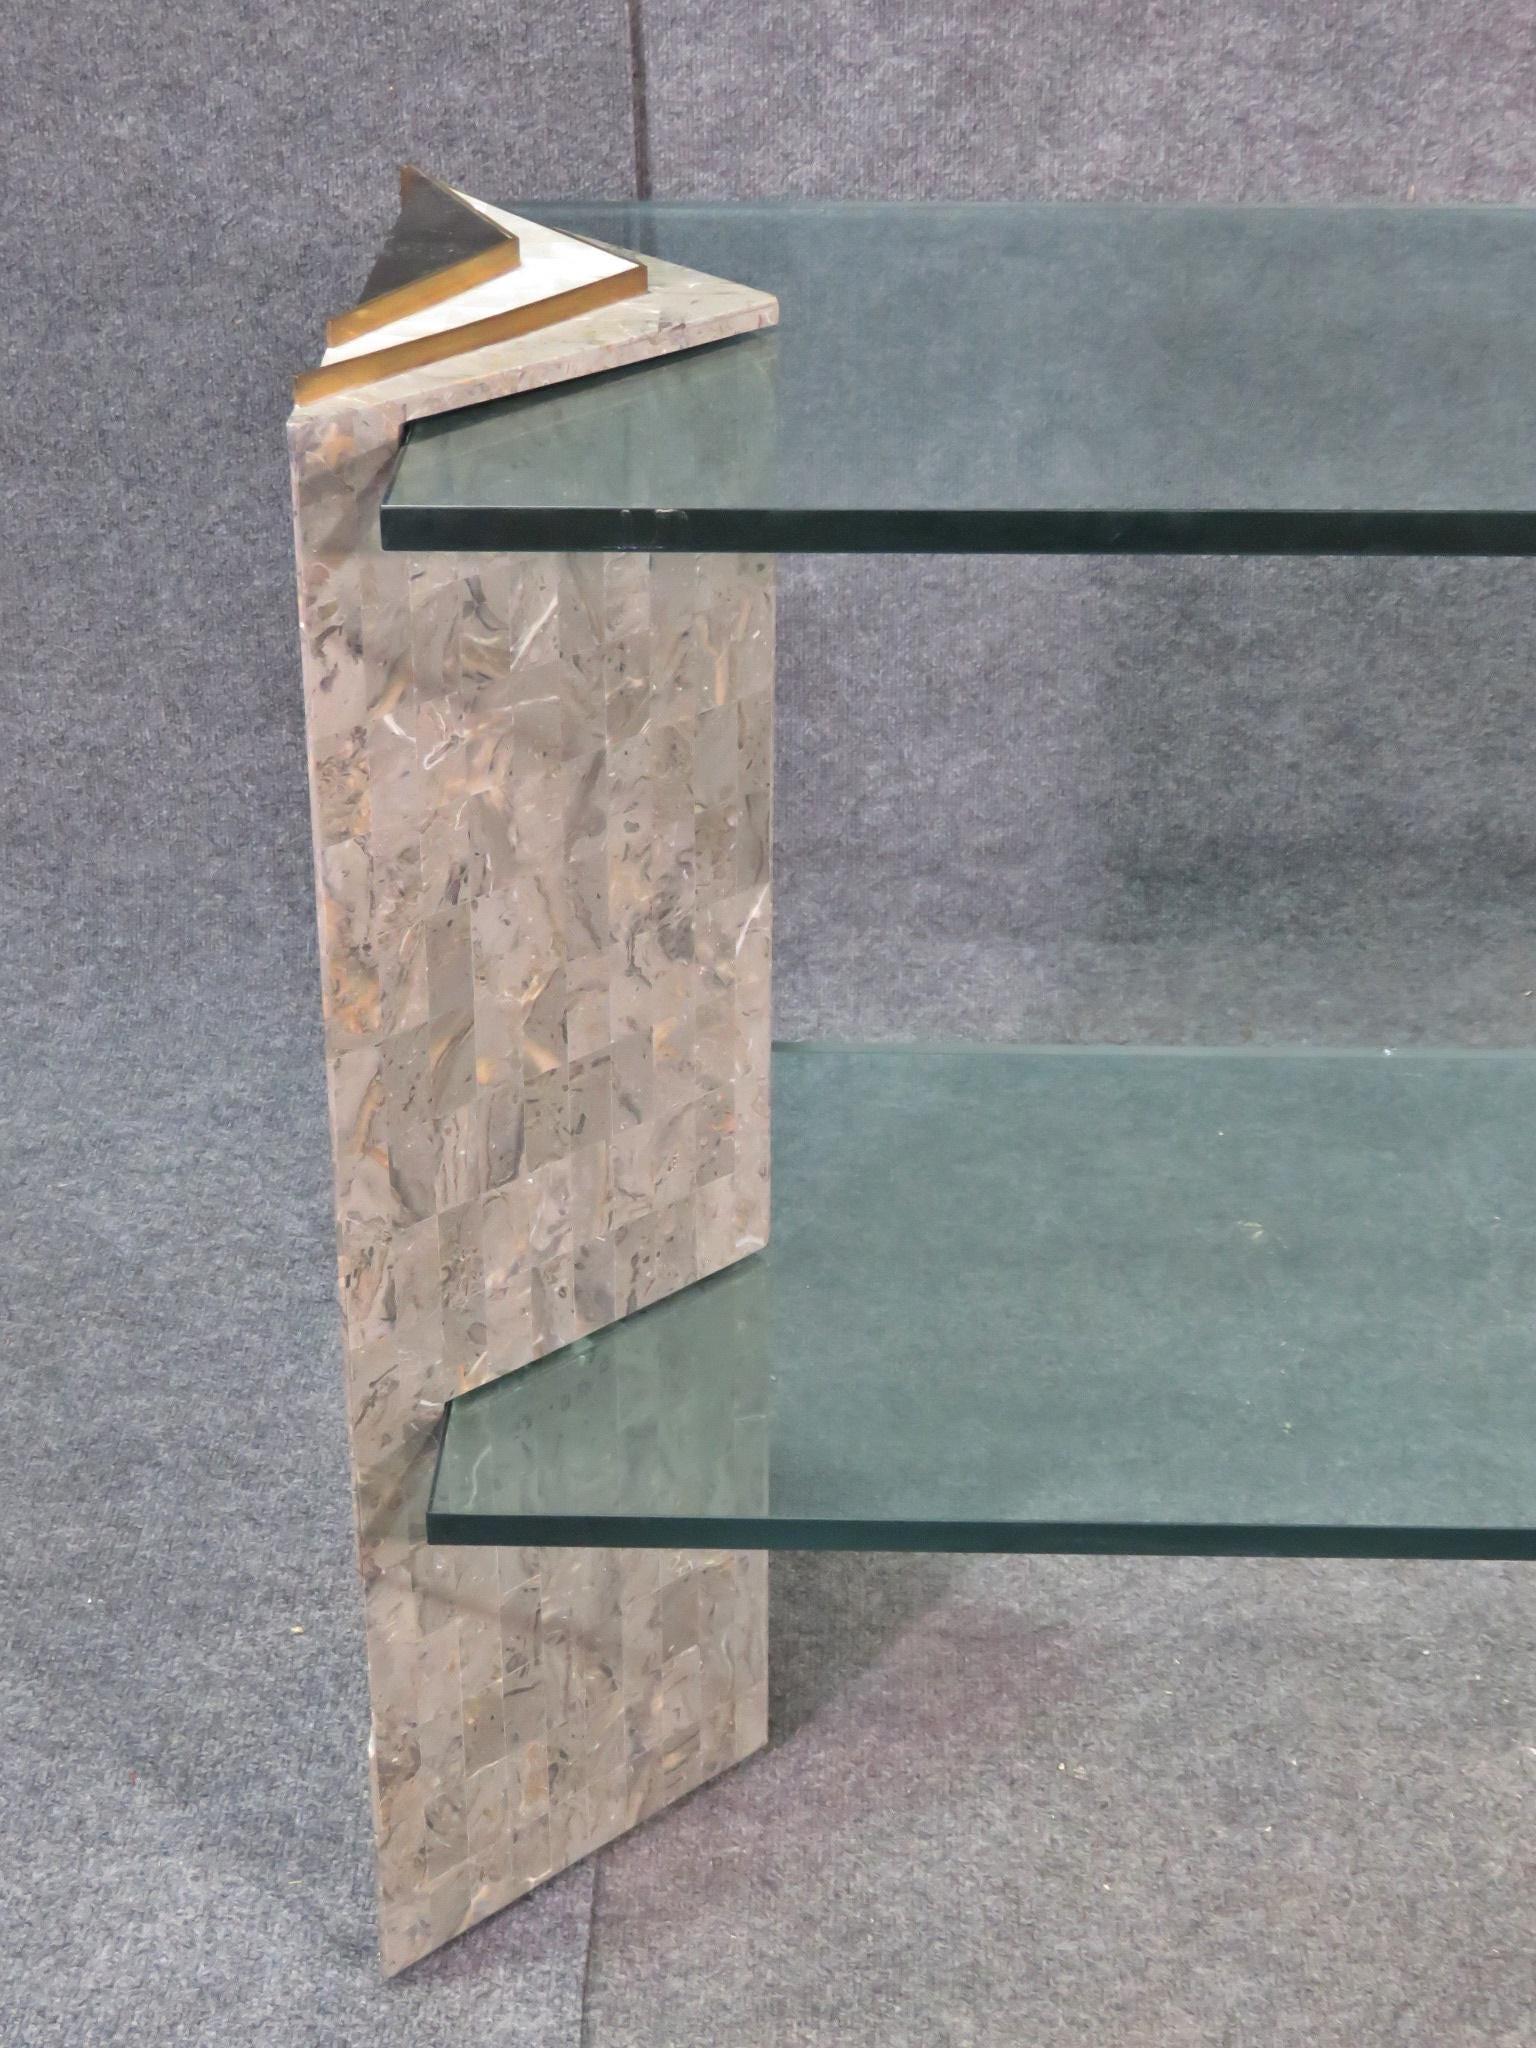 A Mid-Century Modern console table that features an eye-catching combination of stone, mother-of-pearl, brass, and glass. Styled after iconic furniture designers Maitland-Smith. Please confirm item location with seller (NY/NJ).